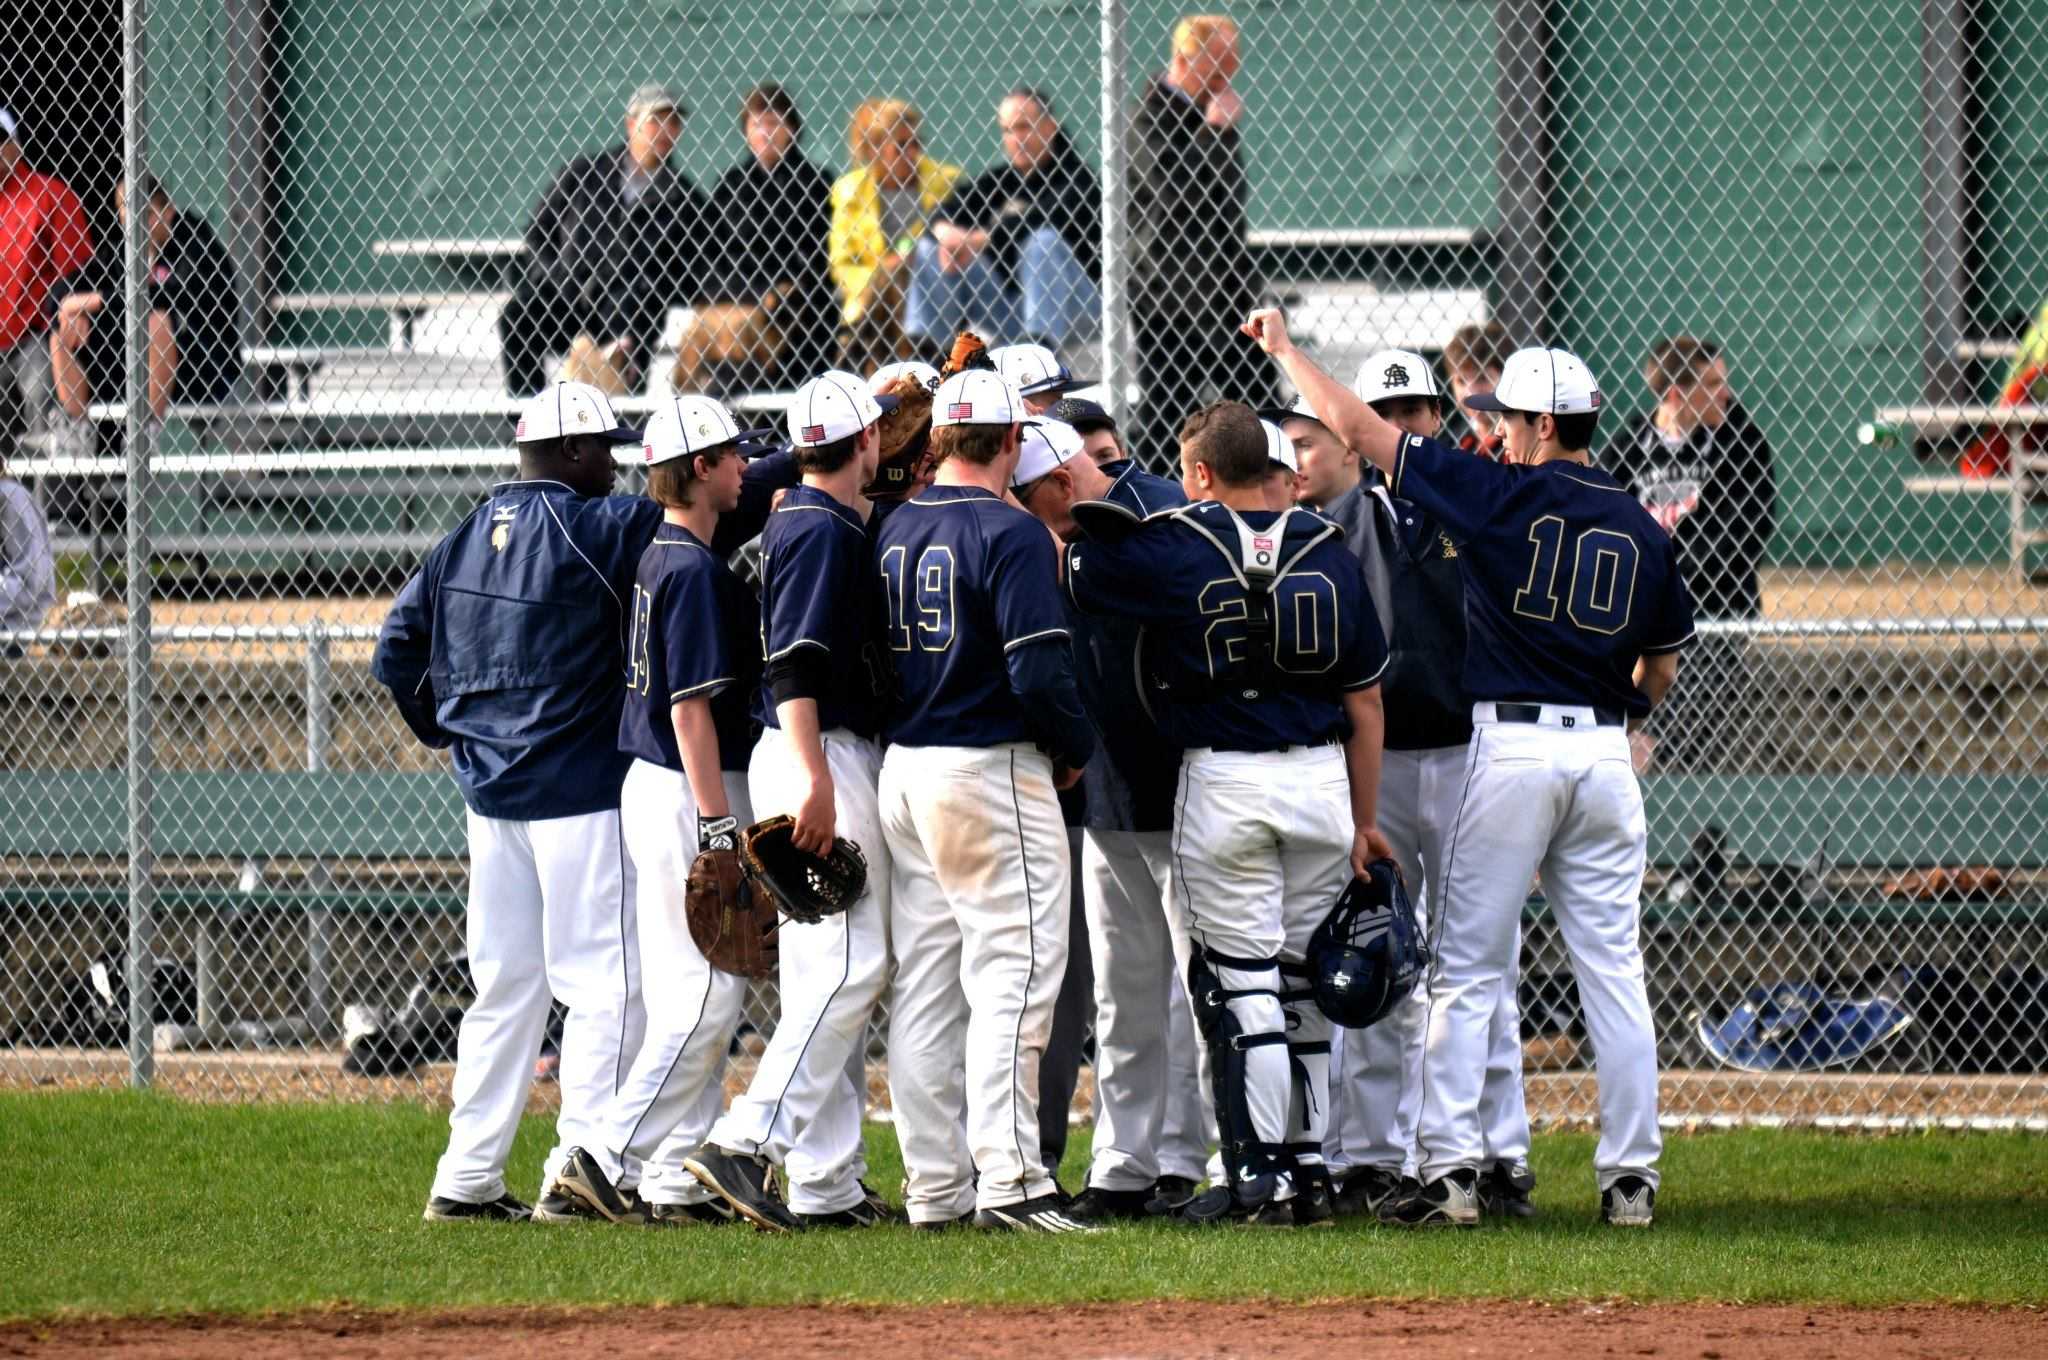 The Boys Varsity Baseball huddle together during the 2011-2012 season. This year, the snow has delayed their season, forcing them to postpone all of their games so far. 